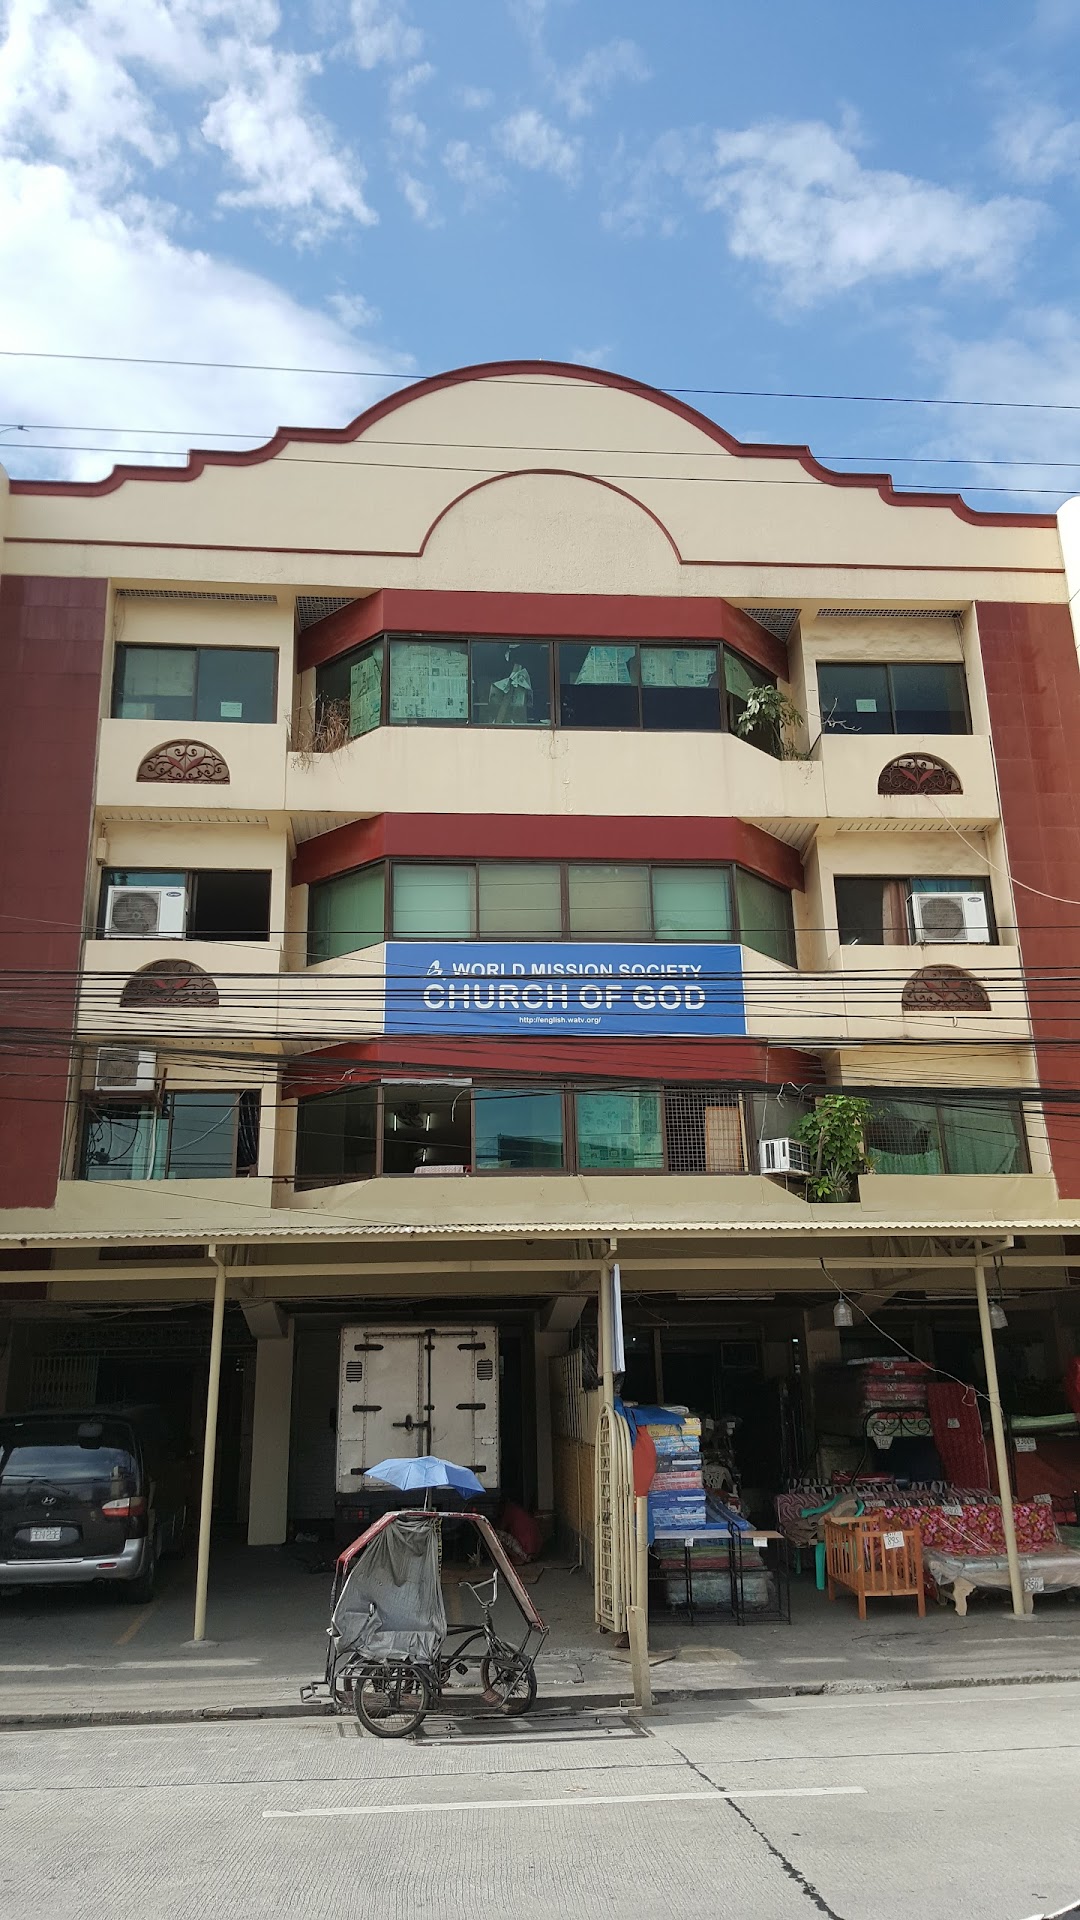 World Mission Society Church of God Mandaluyong, Philippines